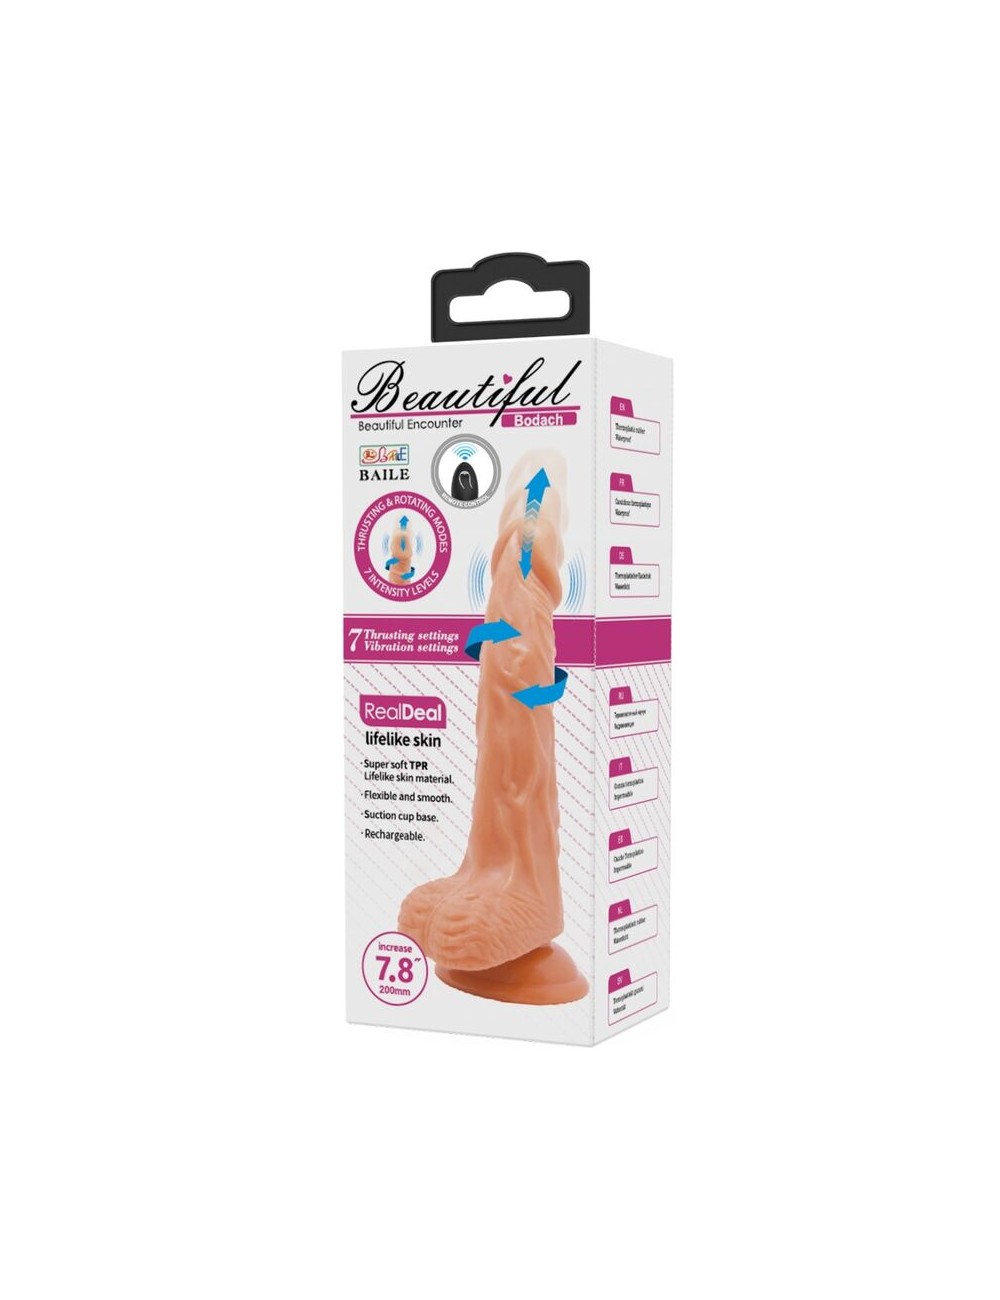 BAILE - BODACH REALISTIC VIBRATOR WITH REMOTE CONTROL SUCTION CUP